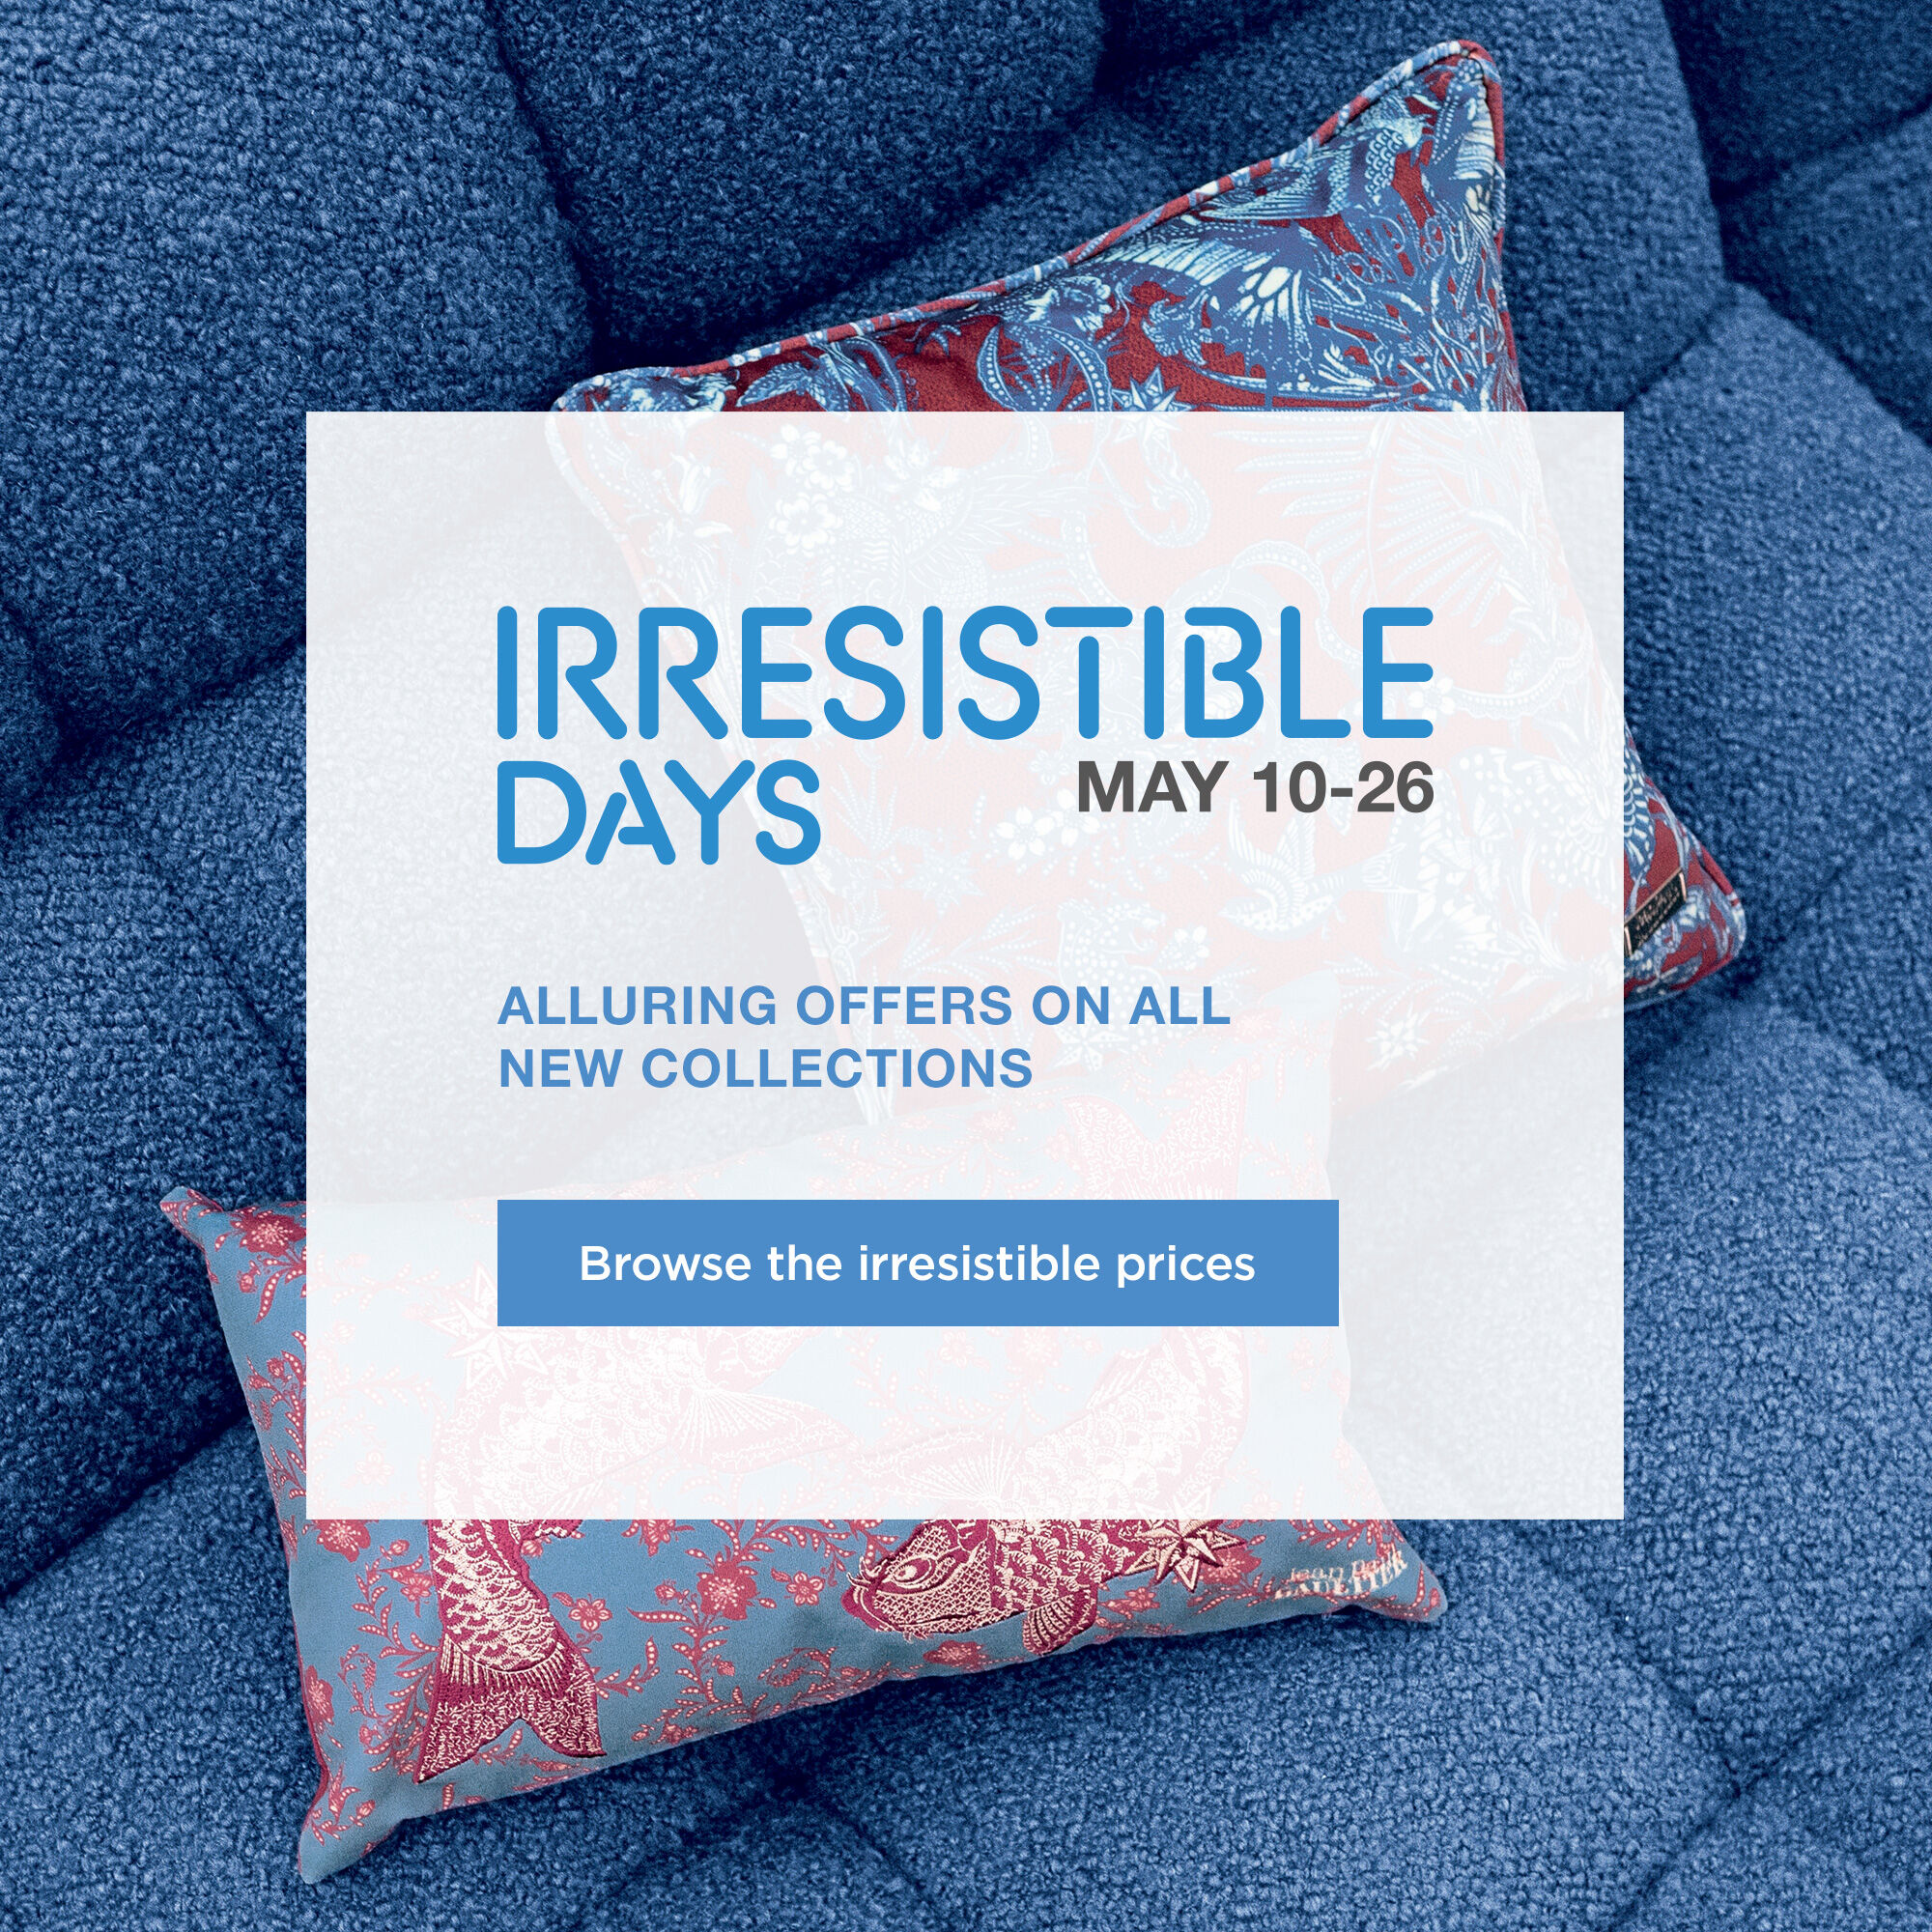 The Irresistible Days, from May 3rd to May 26th